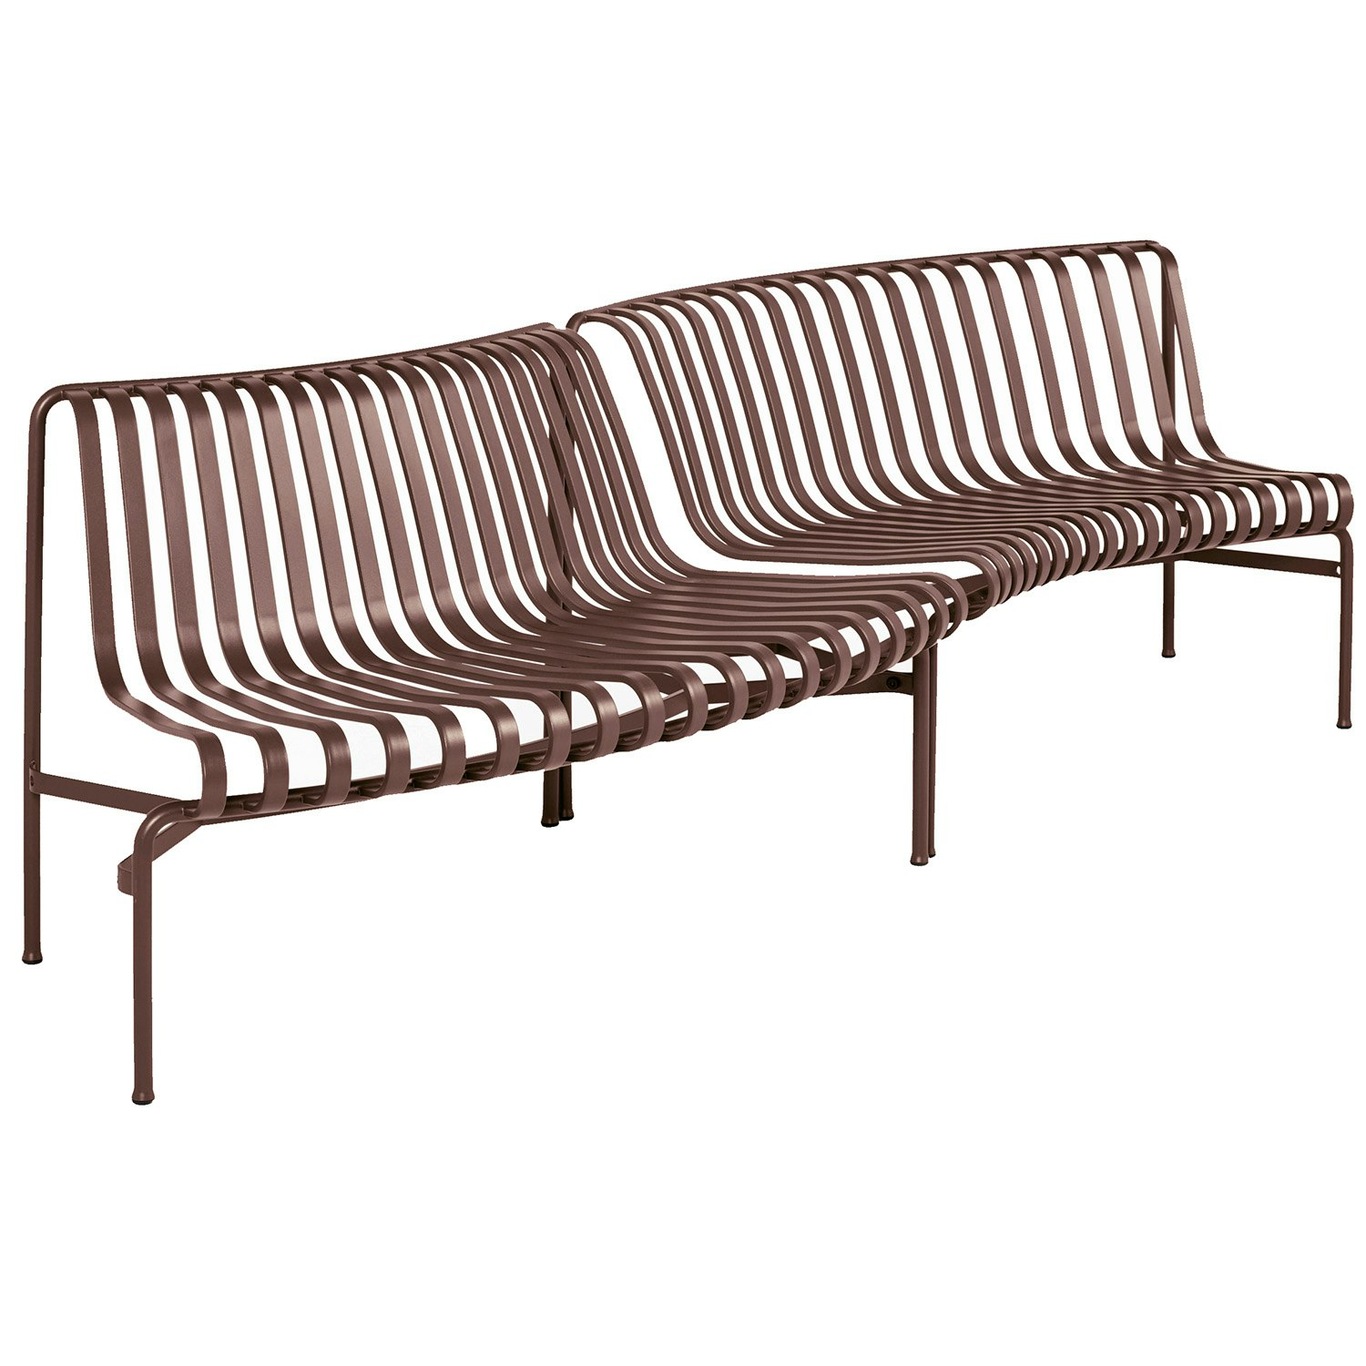 Palissade Park Bench Starter Set In/Out, Iron Red